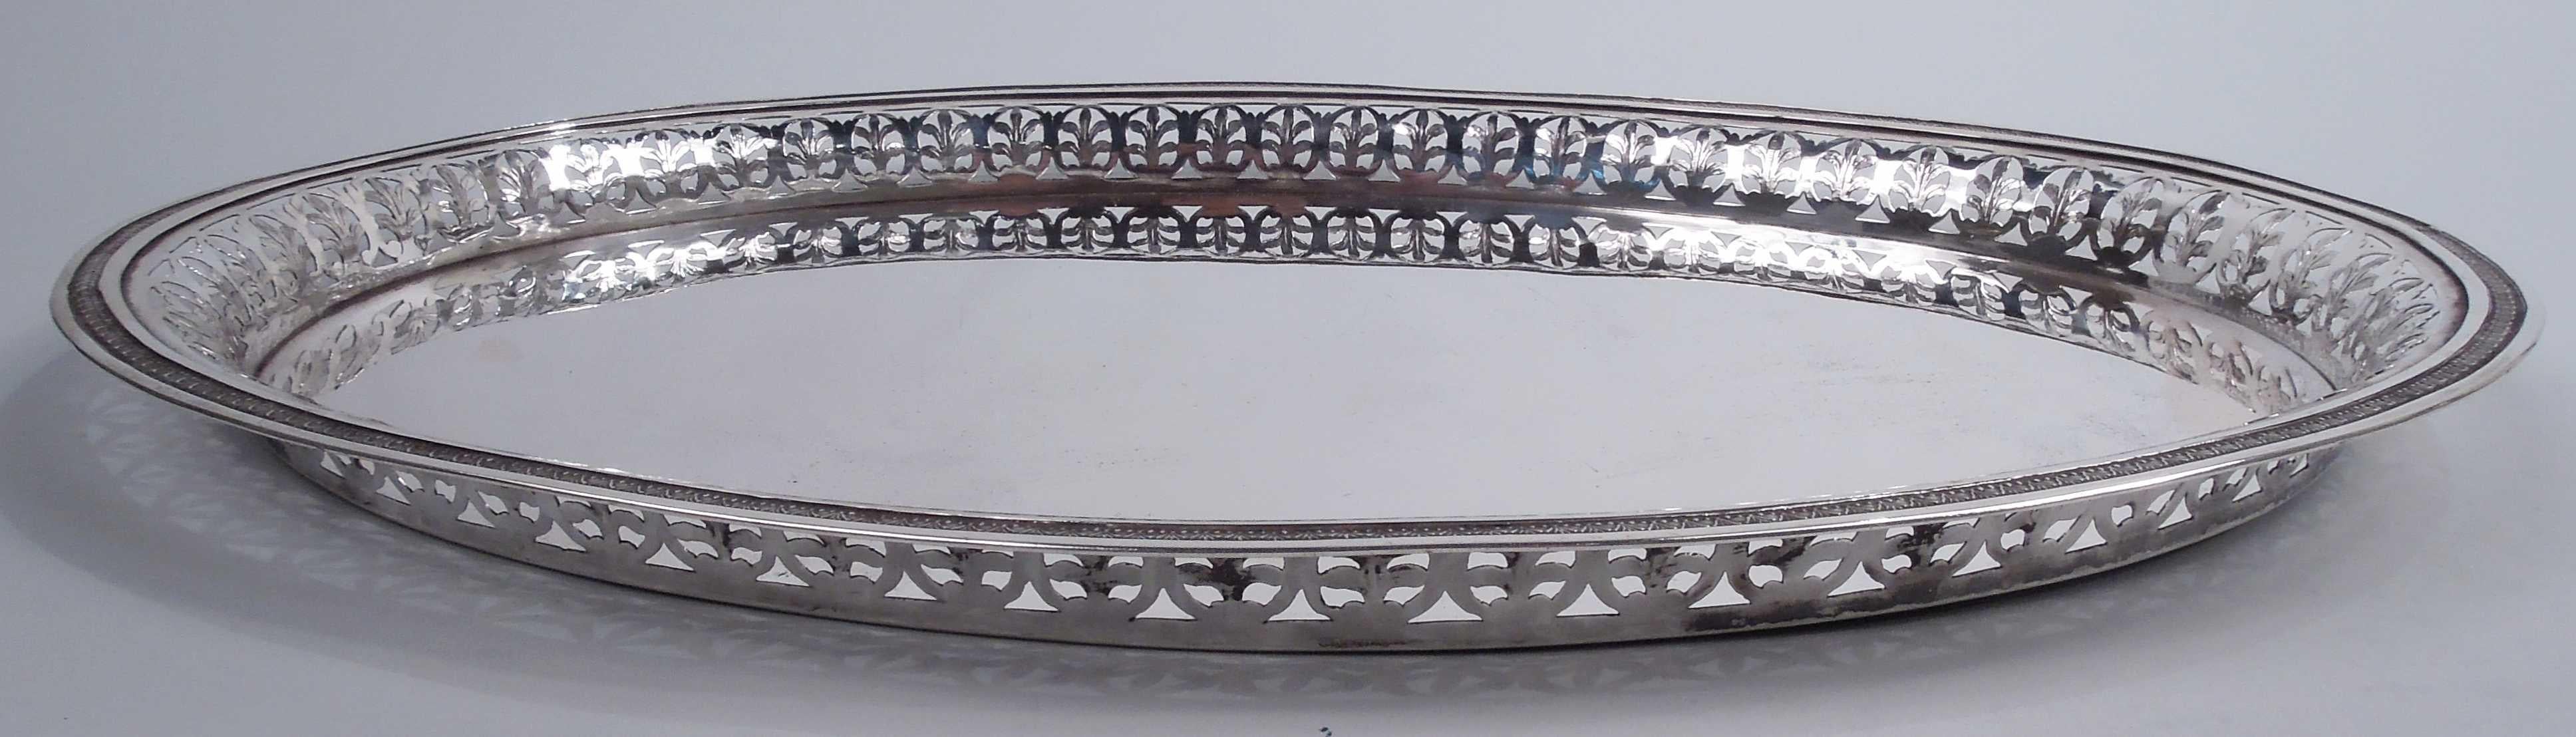 German Biedermeier Classical silver tray, ca 1860. Plain oval well. Sides have open border in form of leaves set in ovals. Cast leaf-and-dart rim on lined ground. A practical serving piece with lots of Mitteleuropa charm. Marked. Weight: 37 troy